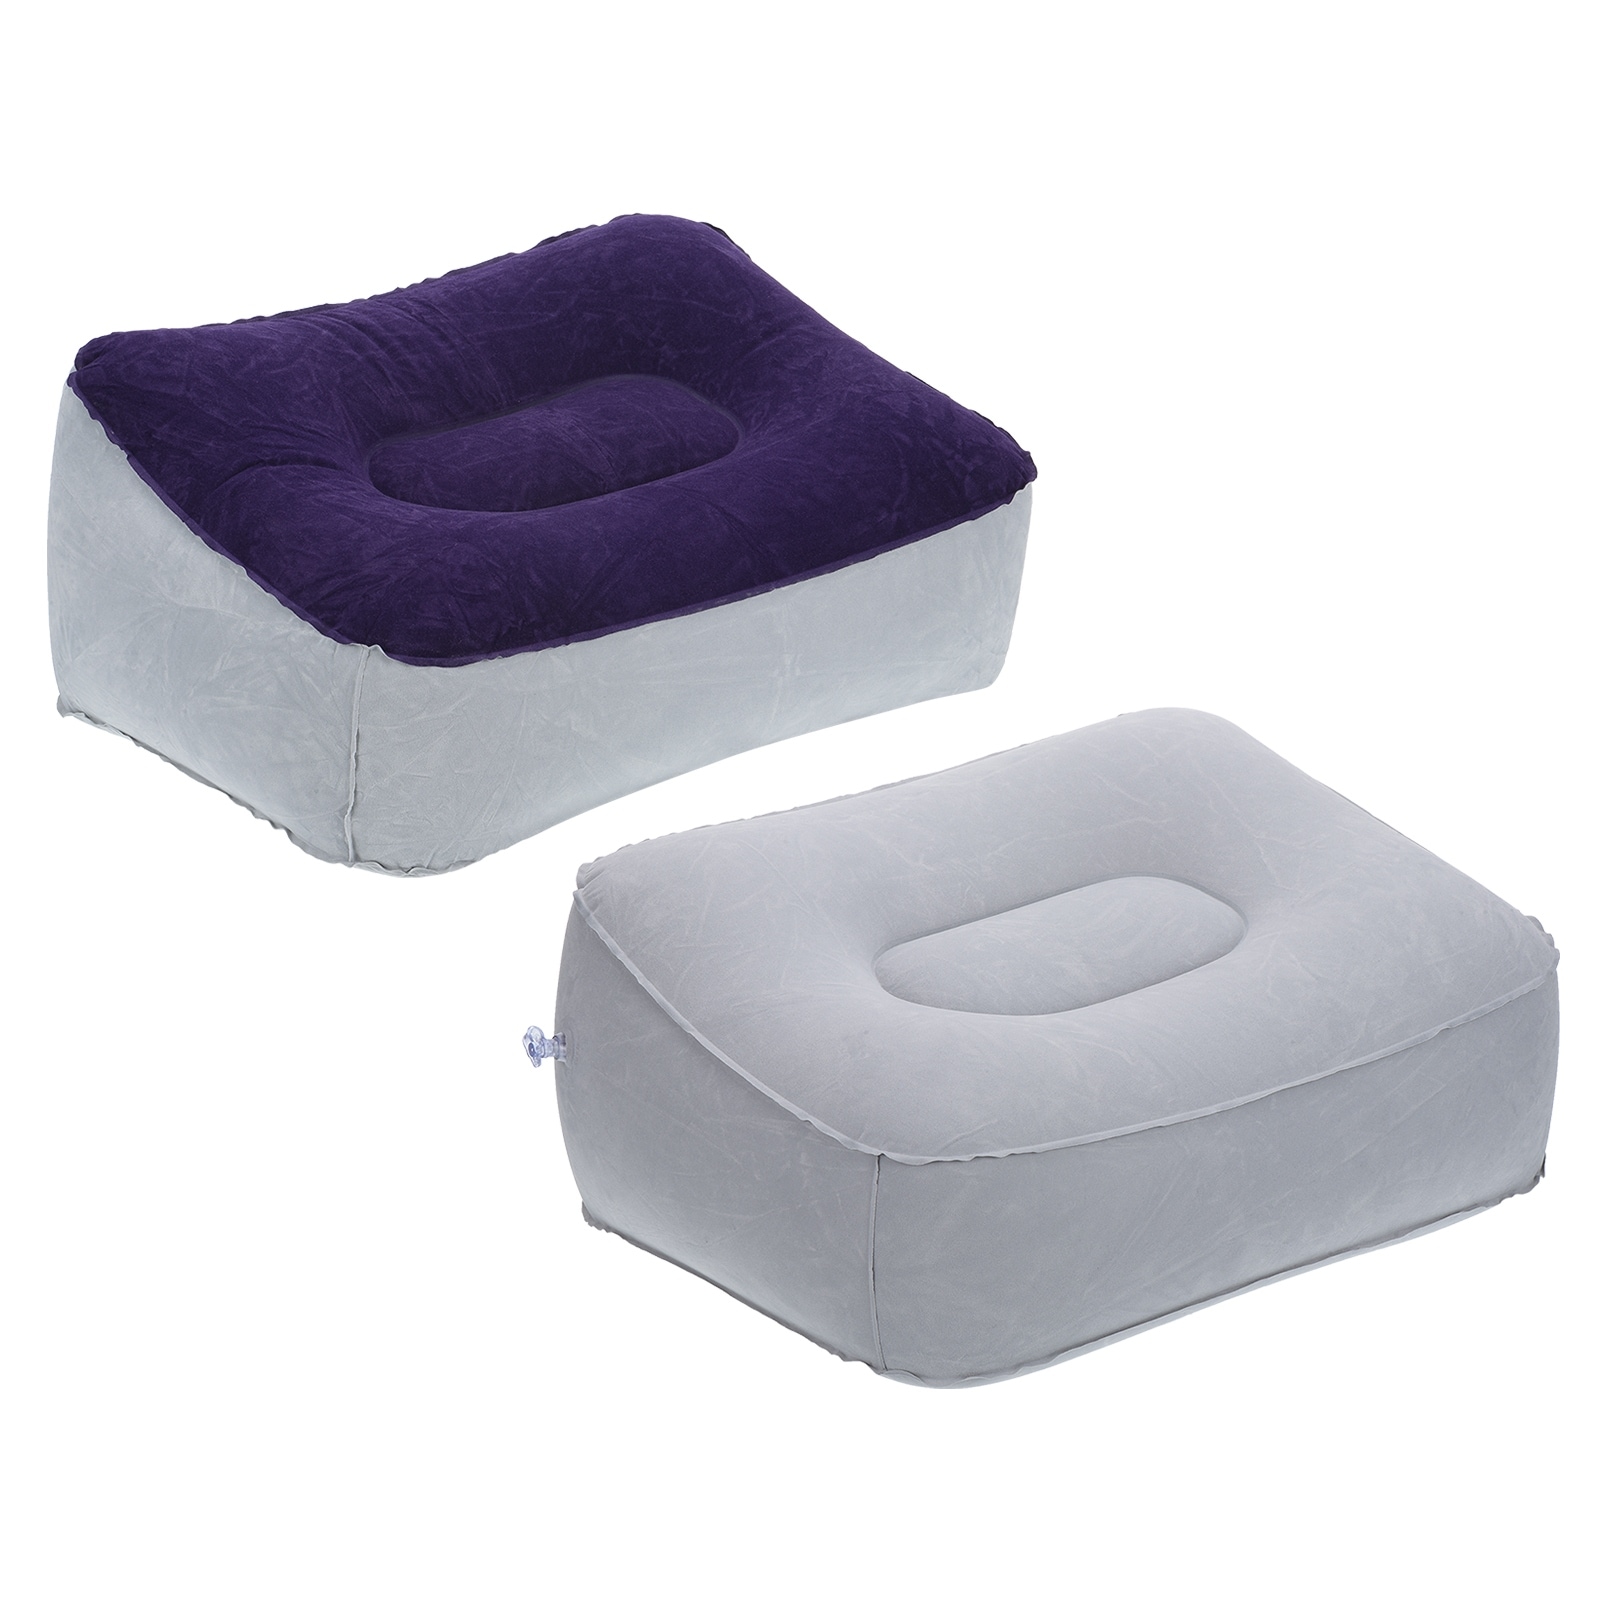 https://ak1.ostkcdn.com/images/products/is/images/direct/e152fc6d103d8cb32f8509a232307012bd64535c/Travel-Foot-Rest-Pillow%2C-Inflatable-Foot-Rest-Airplane-Cushion%2C-2-Colors.jpg